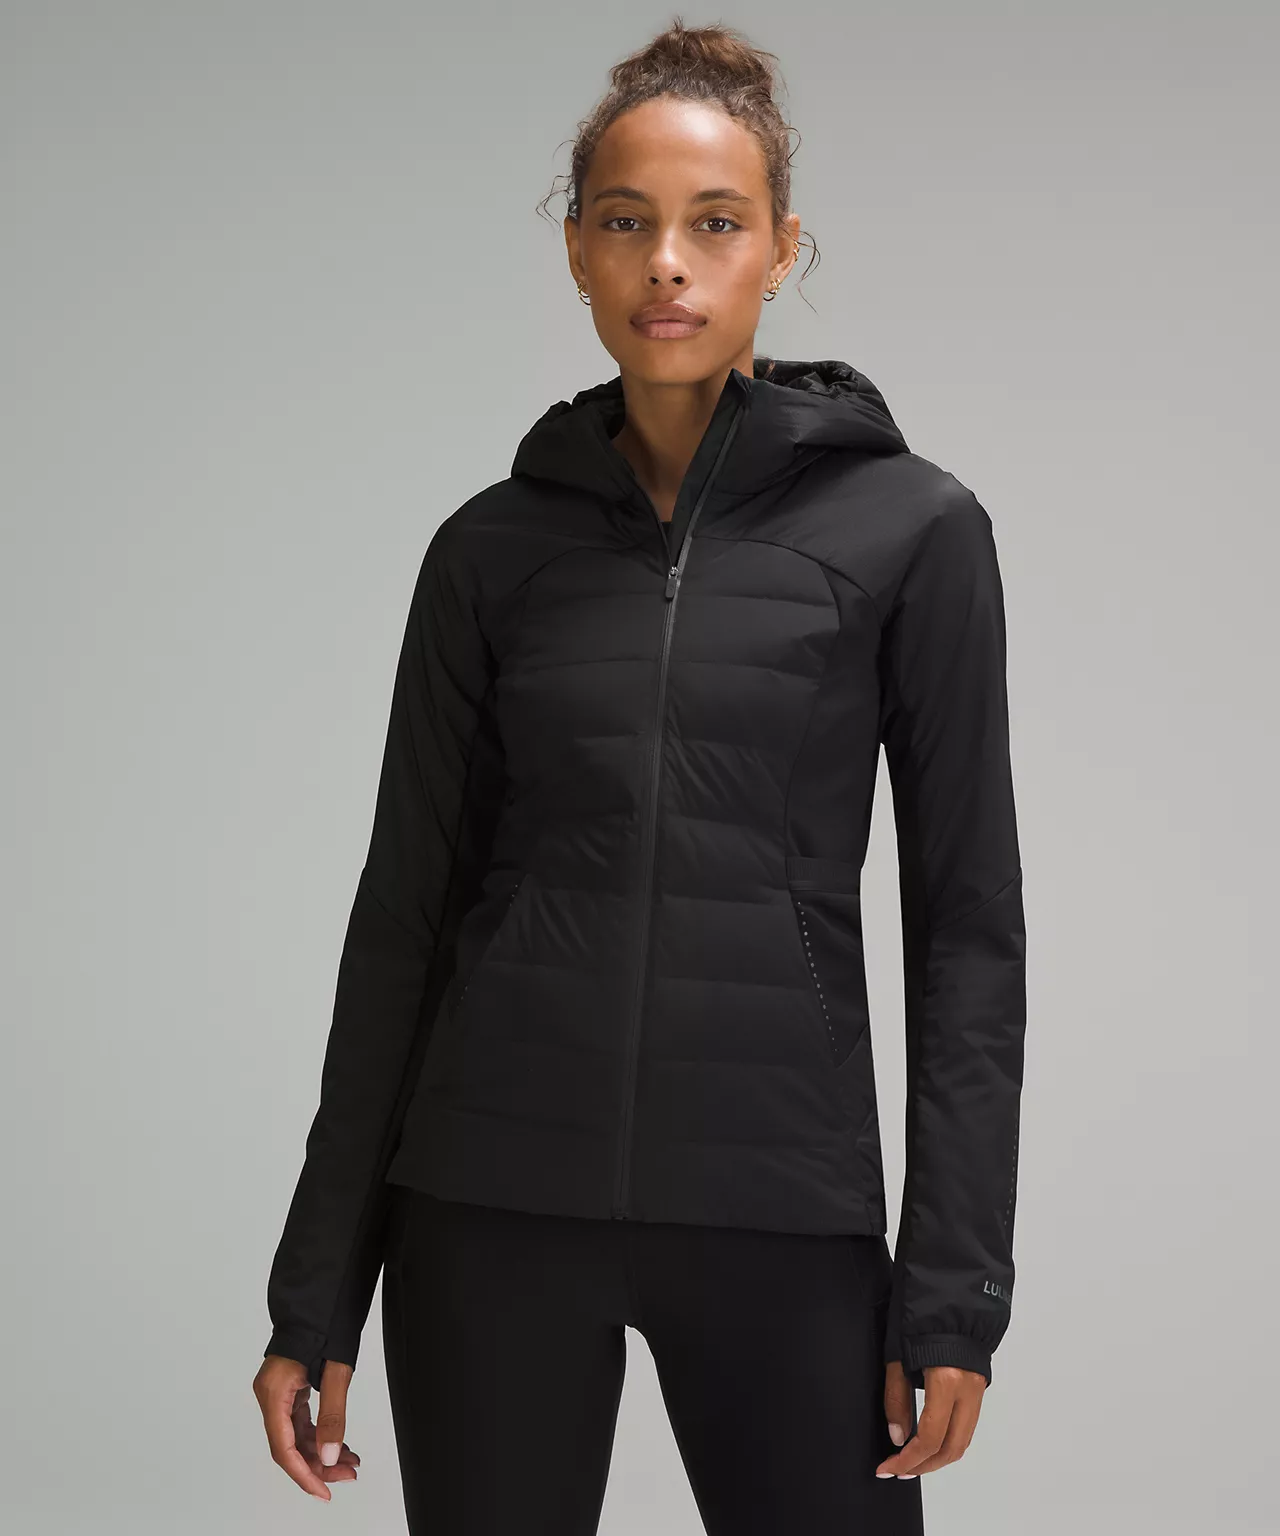 Unlock Wilderness' choice in the Lululemon Vs North Face comparison, the Down for It All Jacket by Lululemon